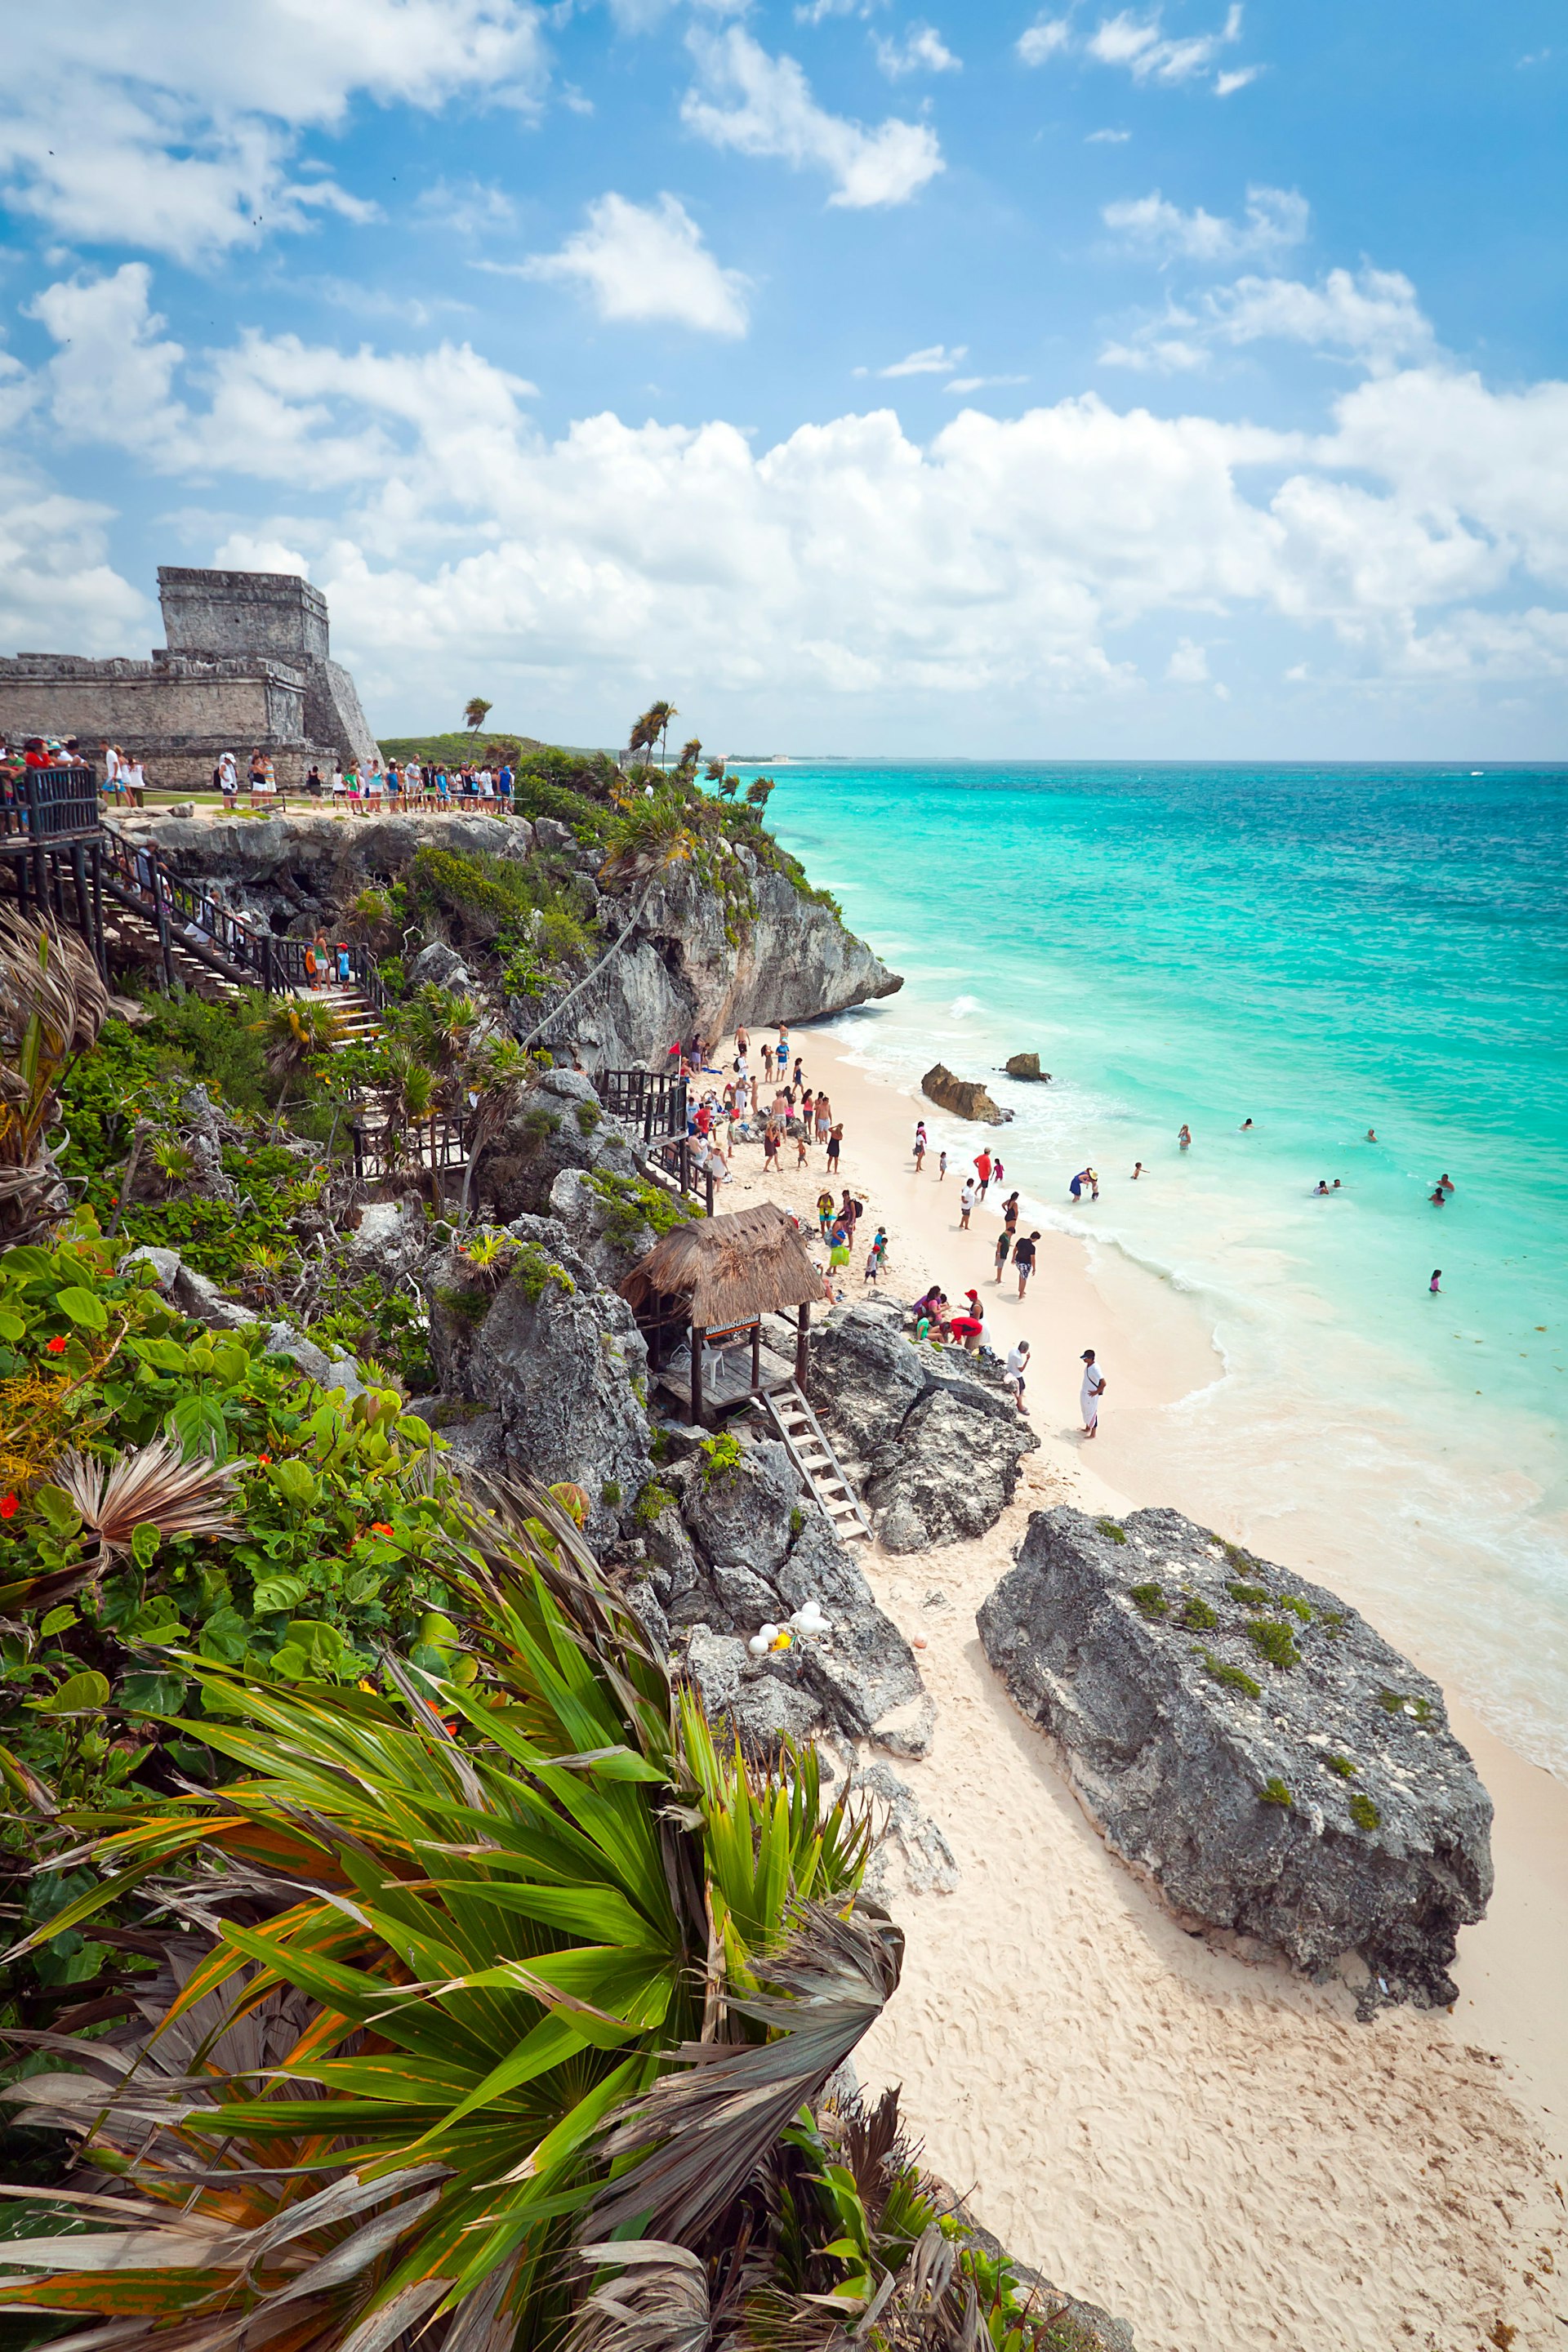 A Maya temple overlooking the beach at Tulum